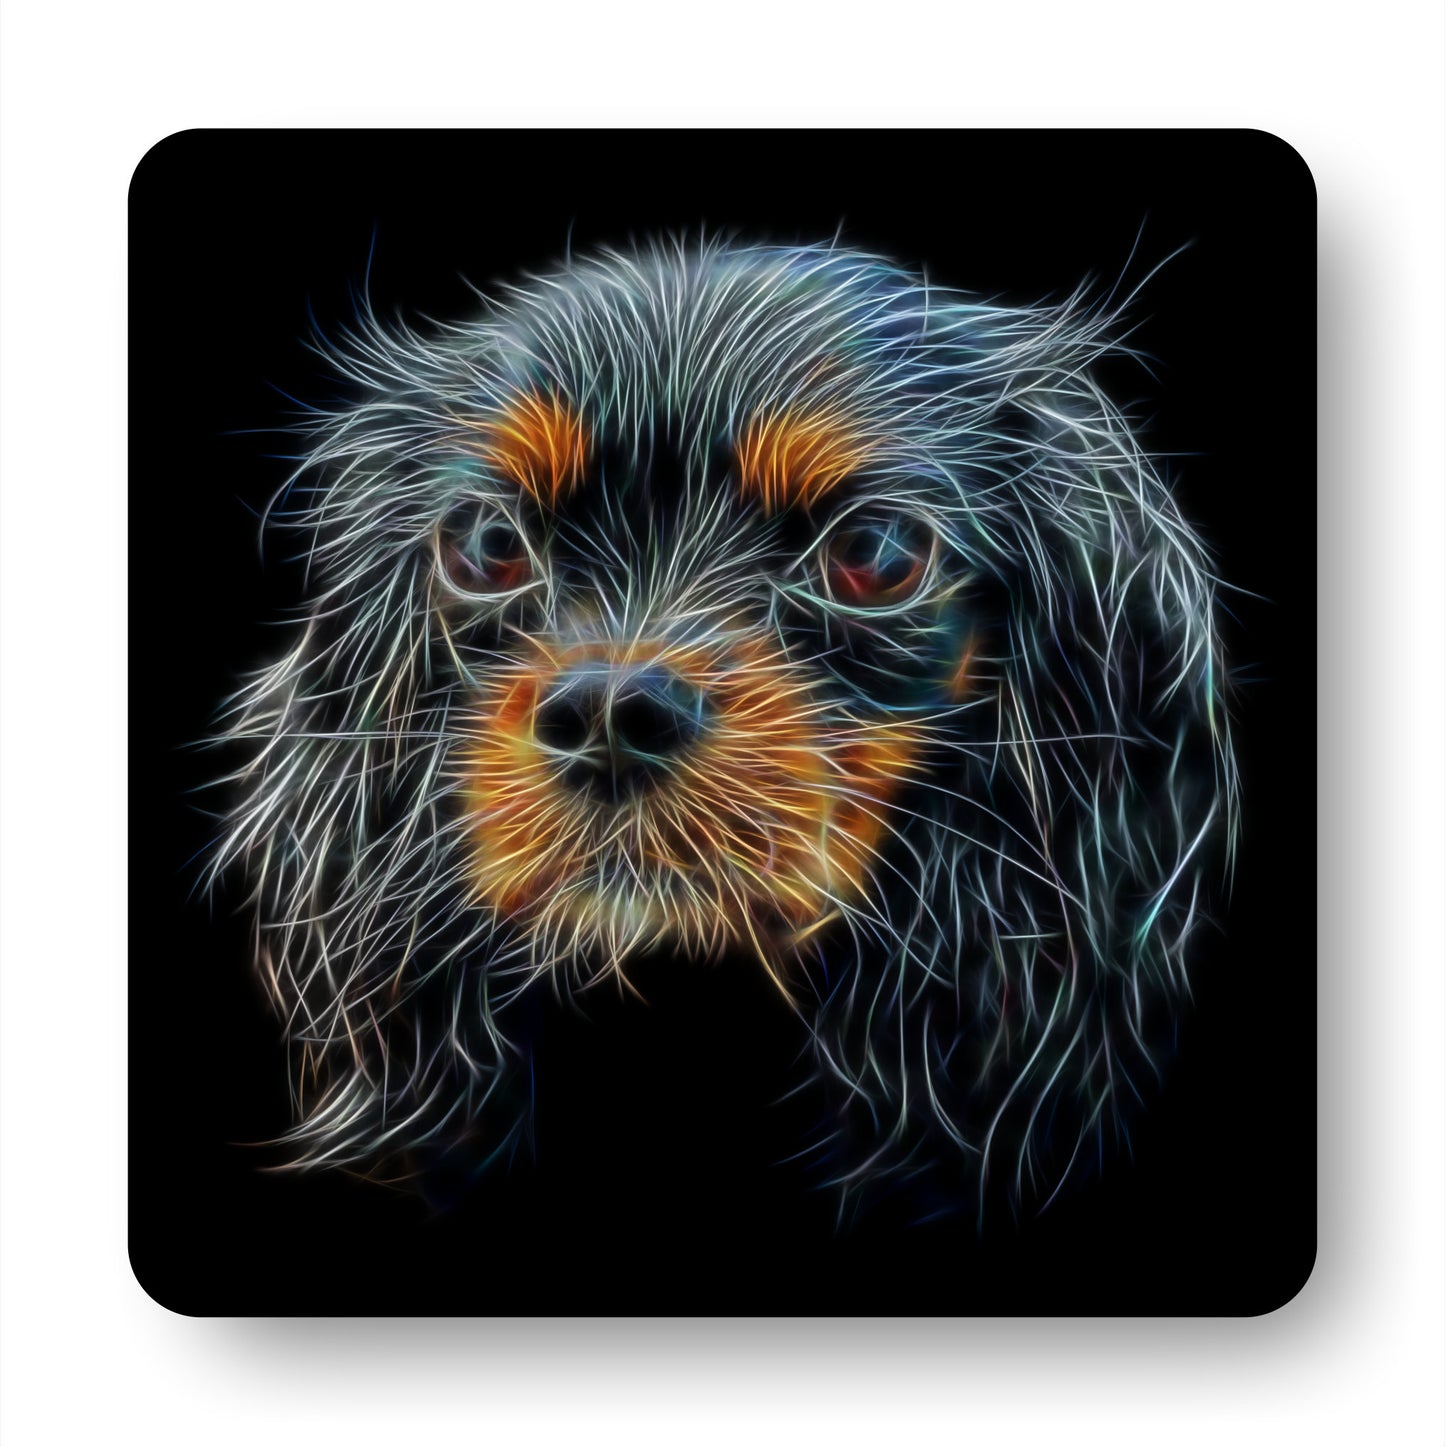 Black and Tan King Charles Spaniel Coasters, Set of 2, with Stunning Fractal Art Design.